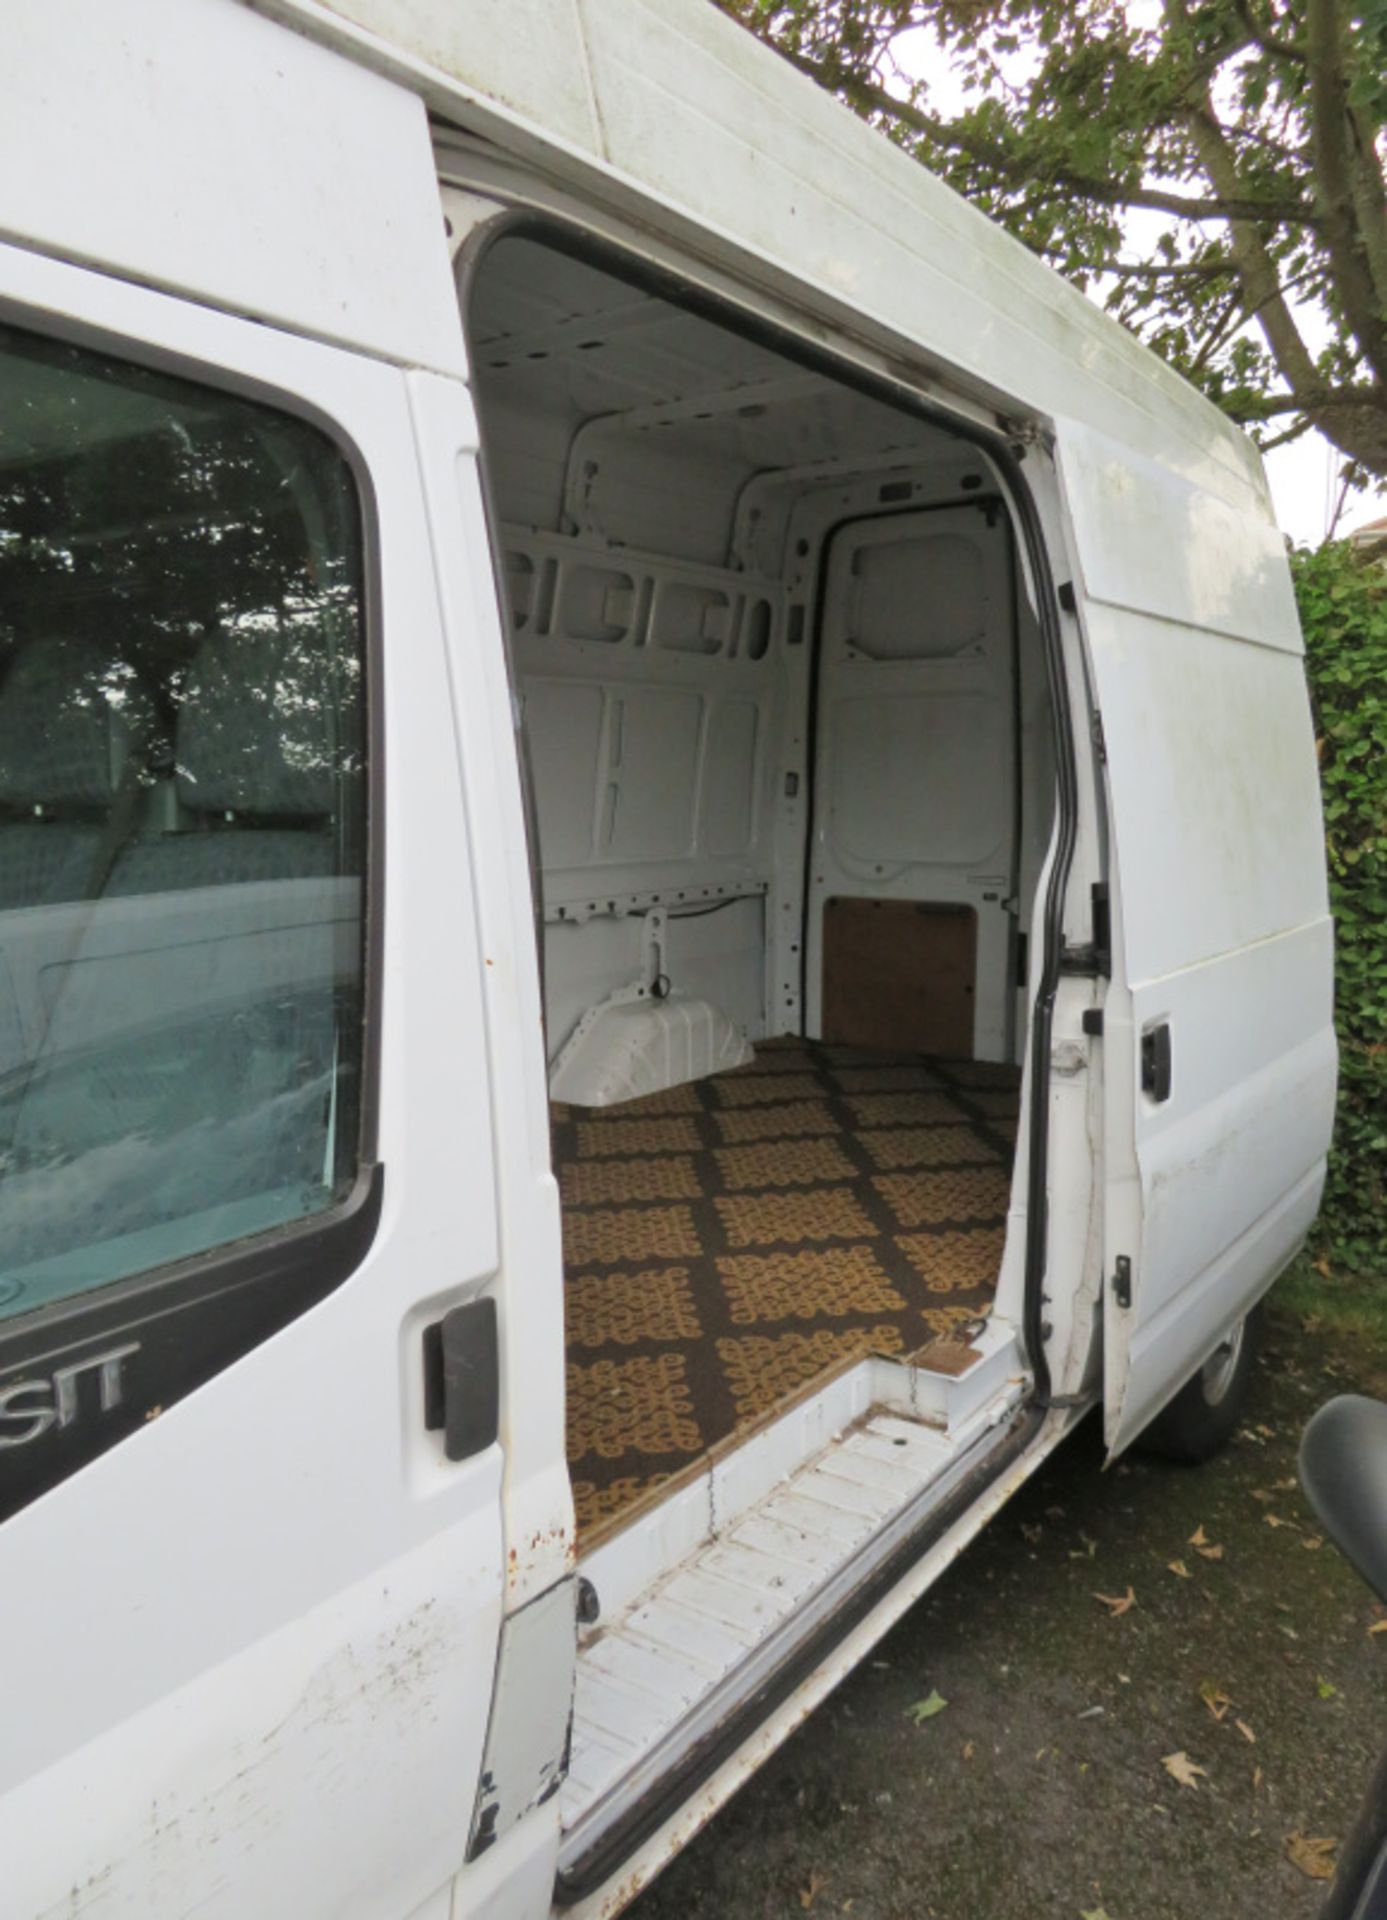 Ford Transit High Van Roof, Petrol, Mileage 33357 mile, Air conditioning, Runs & drives well on - Image 12 of 21